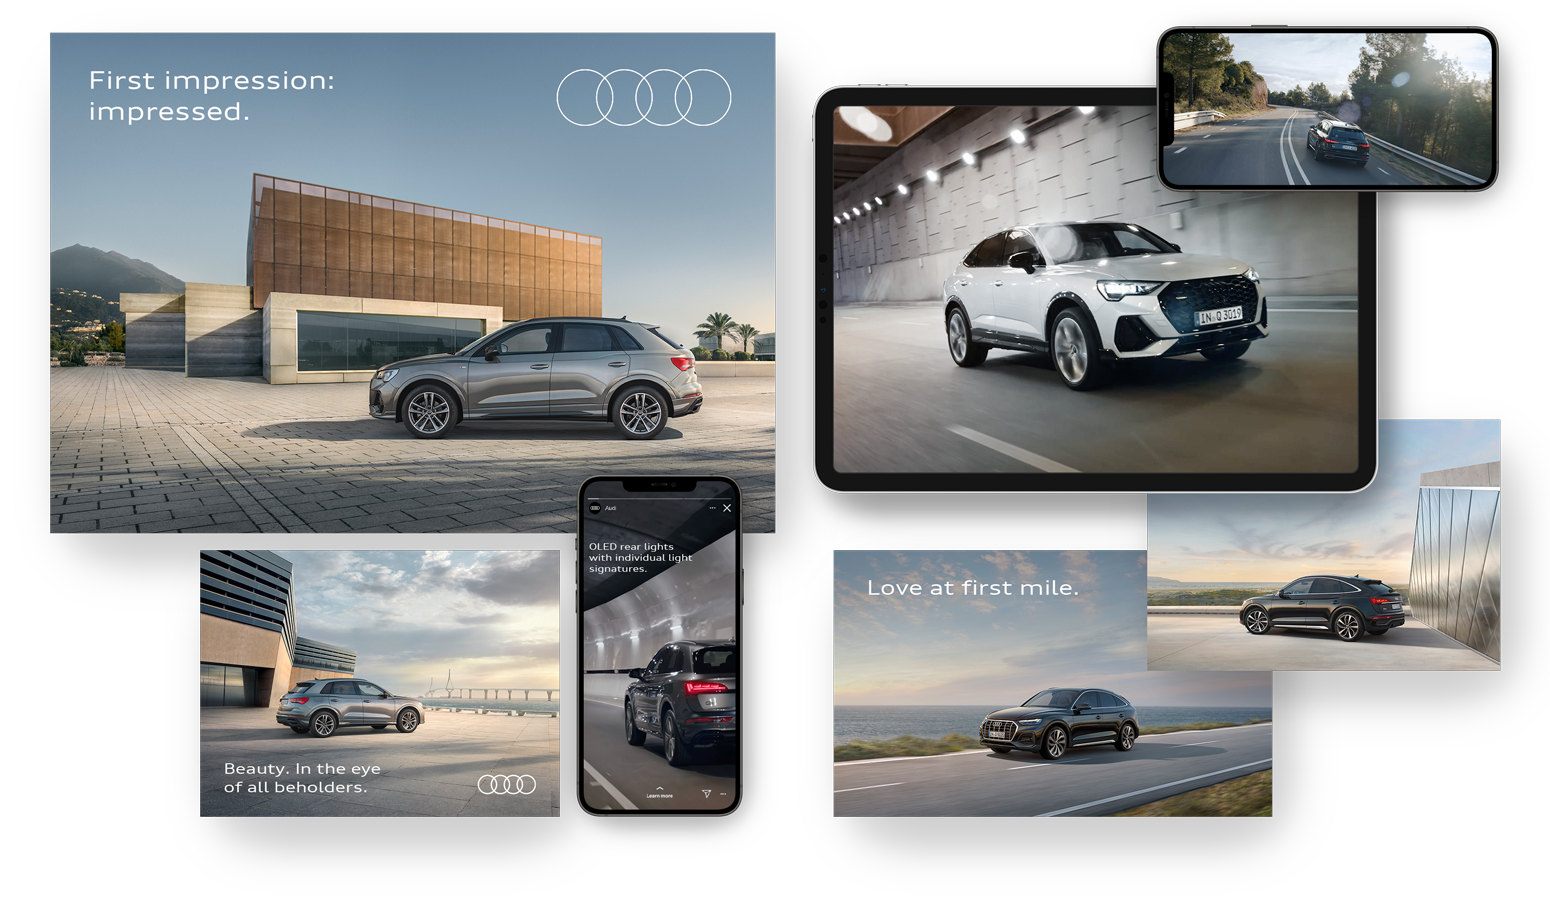 Audi_Brand2Sales_CampaignAssets_1550×902_05_Overview_01_png24